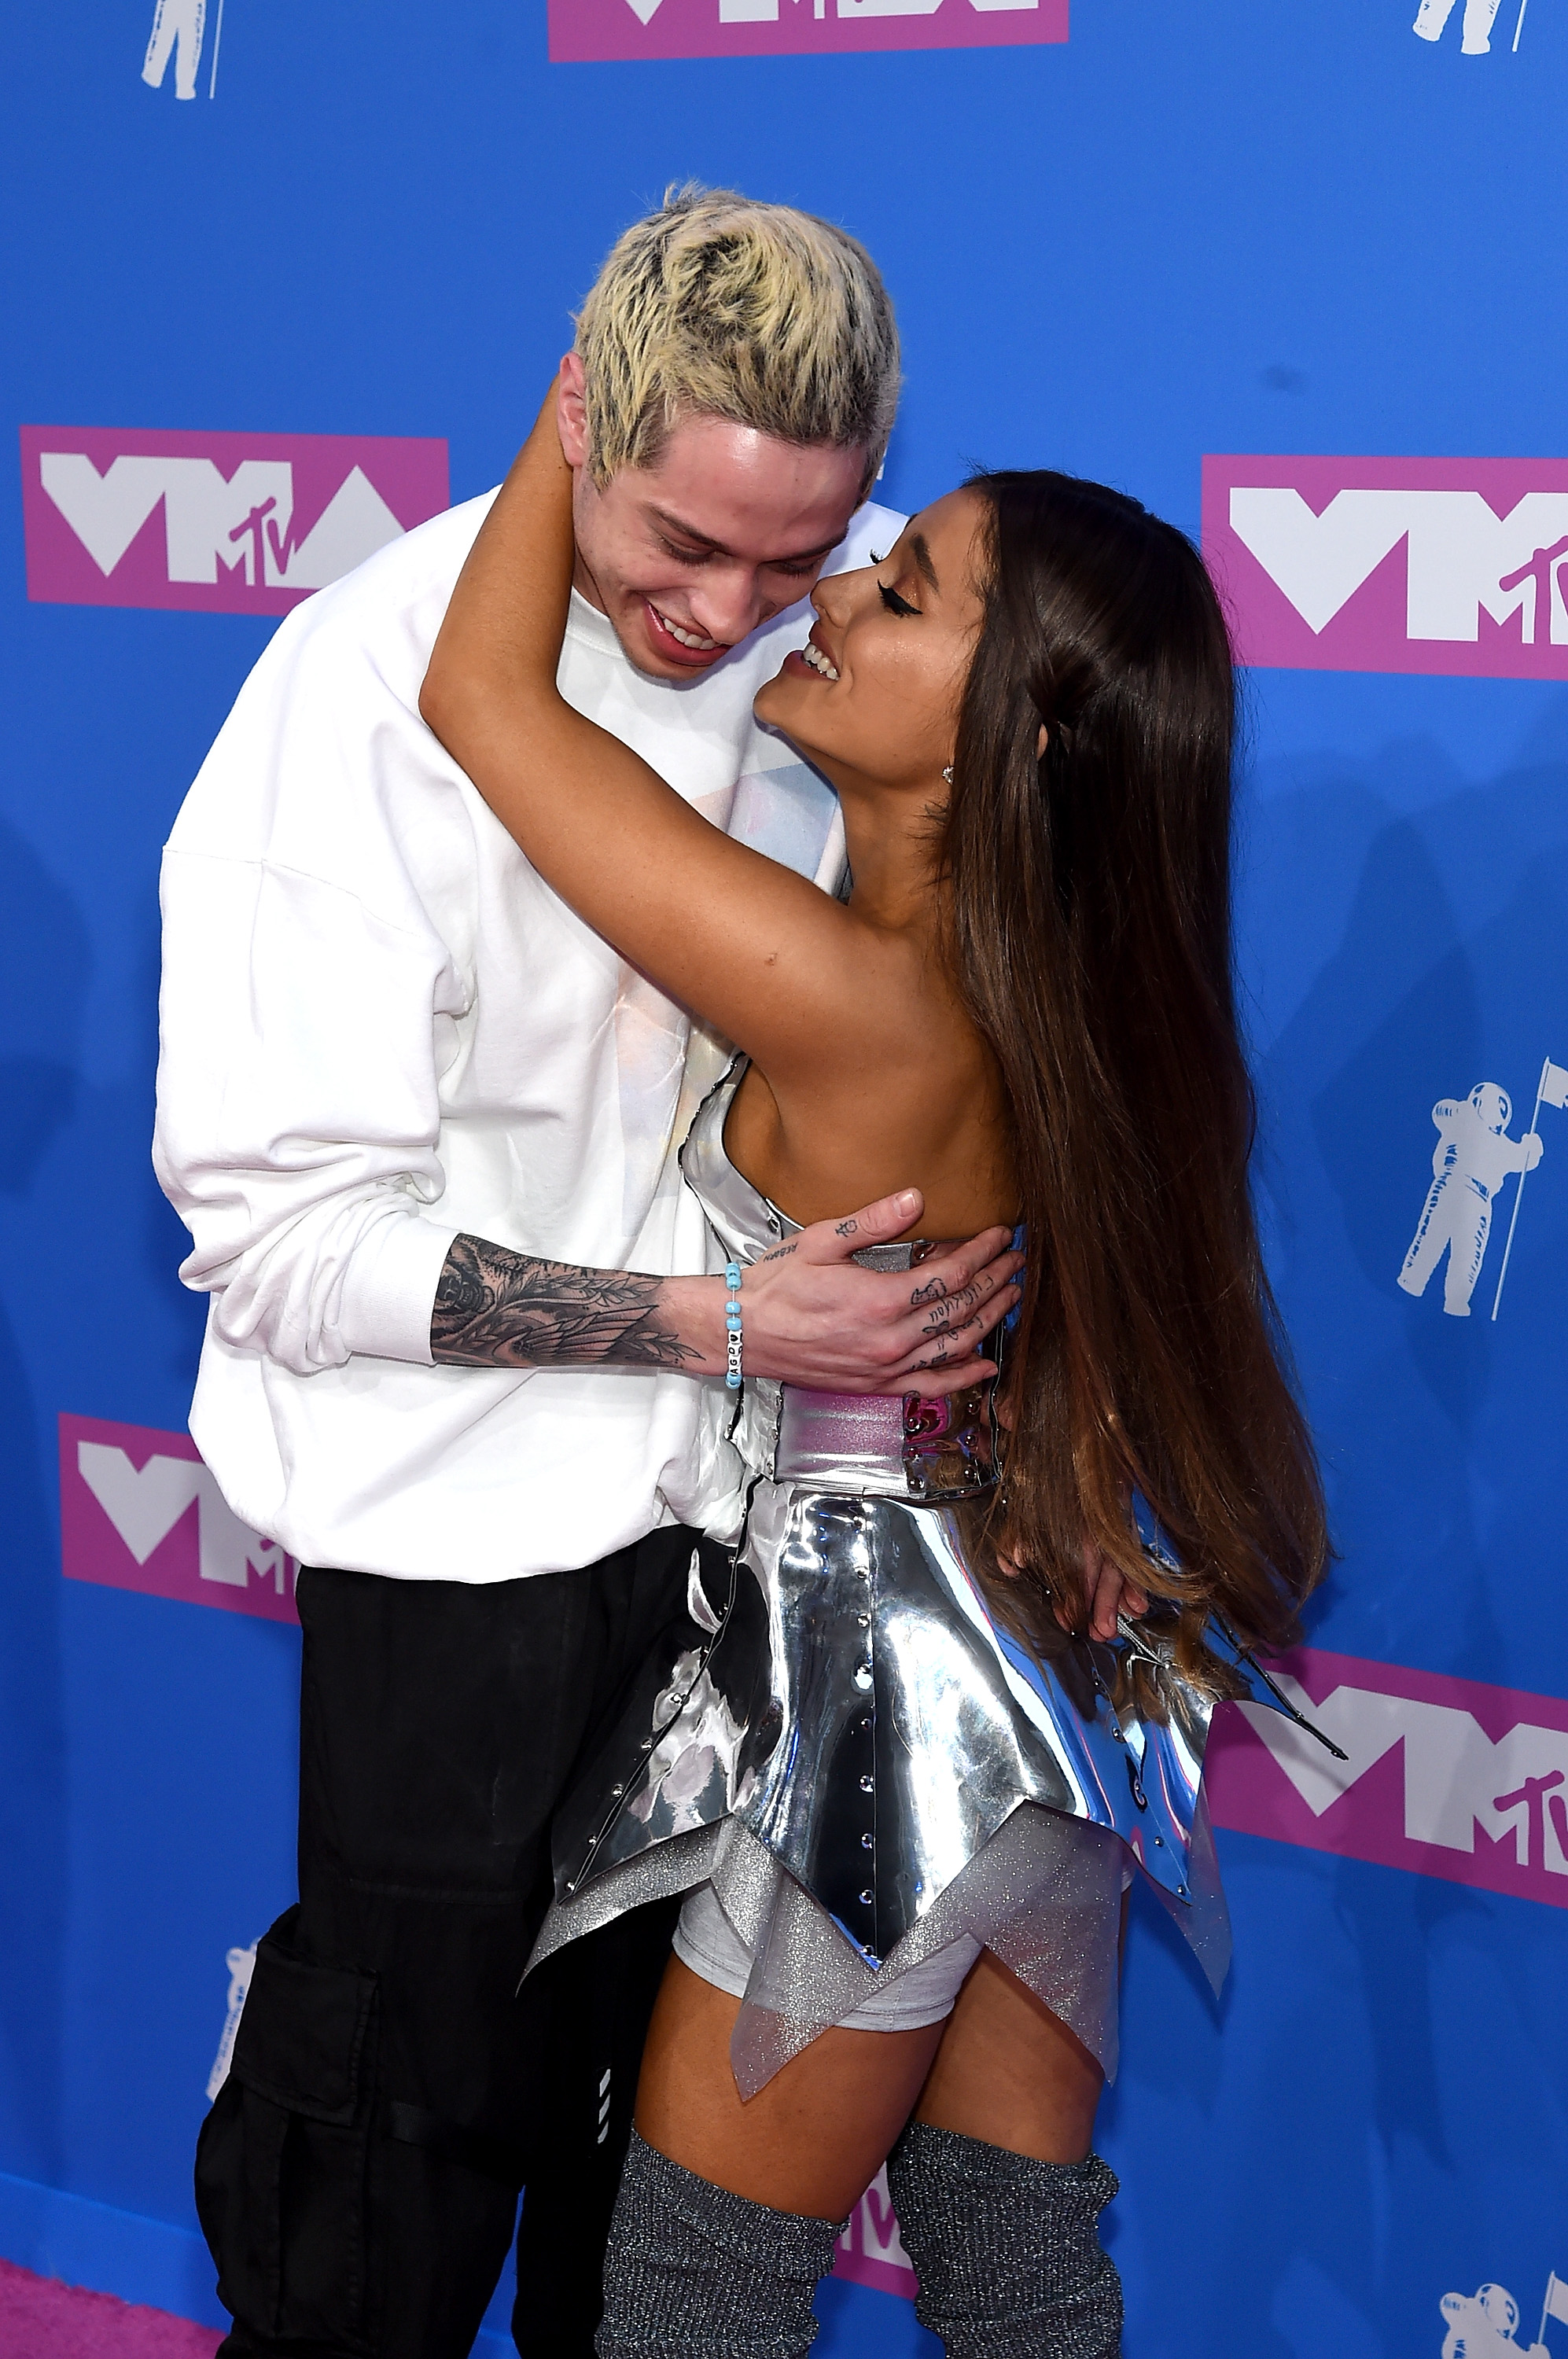 NEW YORK, NY - AUGUST 20: Pete Davidson and Ariana Grande attend the 2018 MTV Video Music Awards at Radio City Music Hall on August 20, 2018 in New York City. (Photo by Jamie McCarthy/Getty Images)